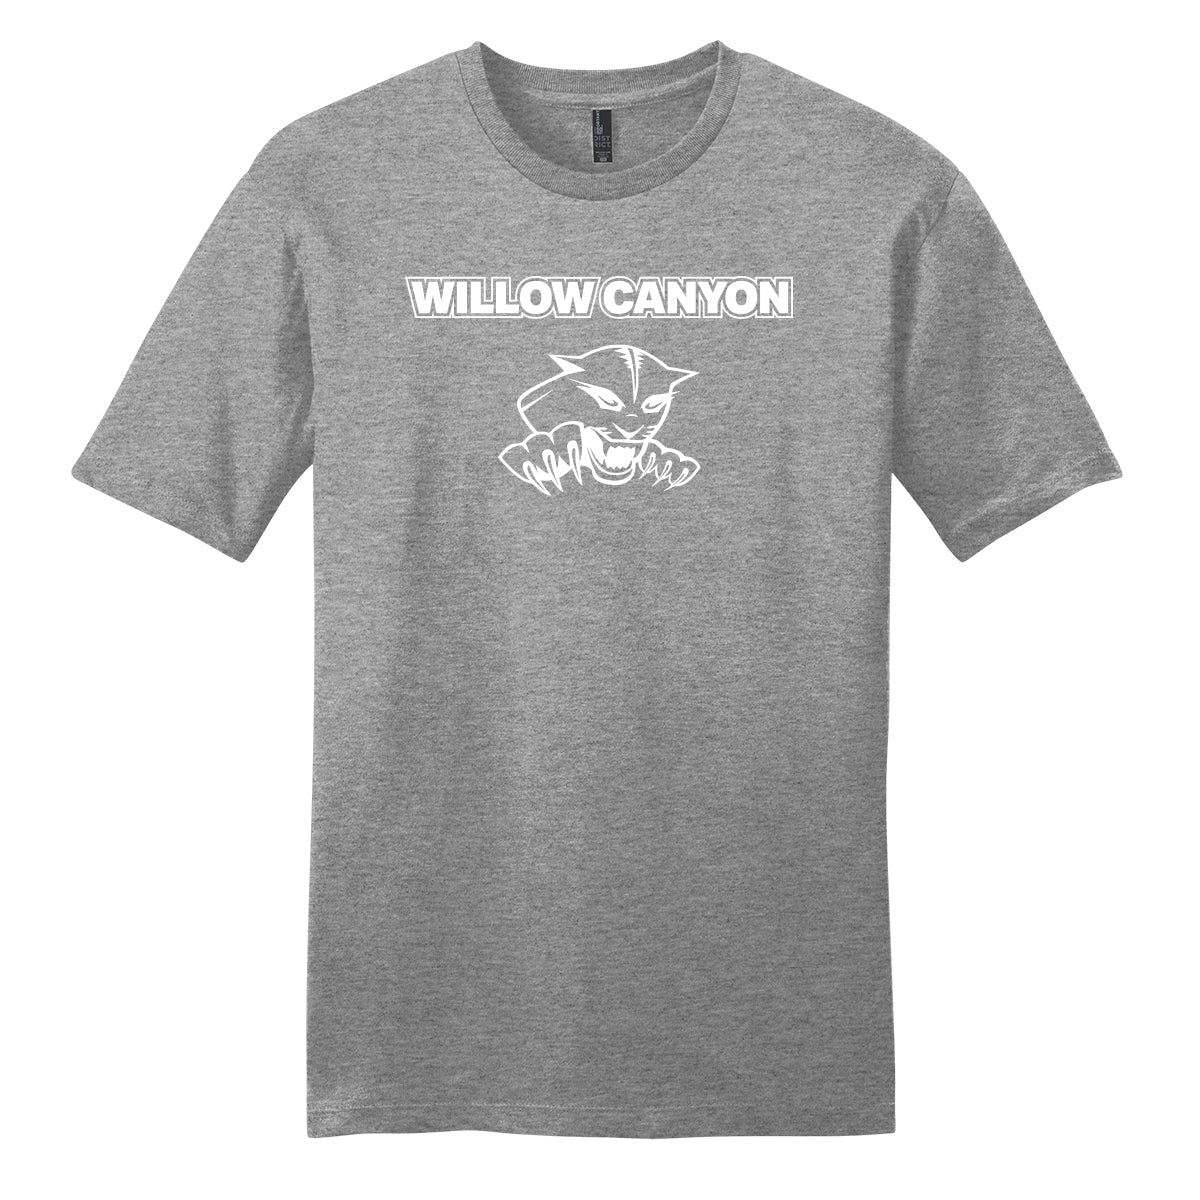 Willow Canyon Wildcats Unisex Tee